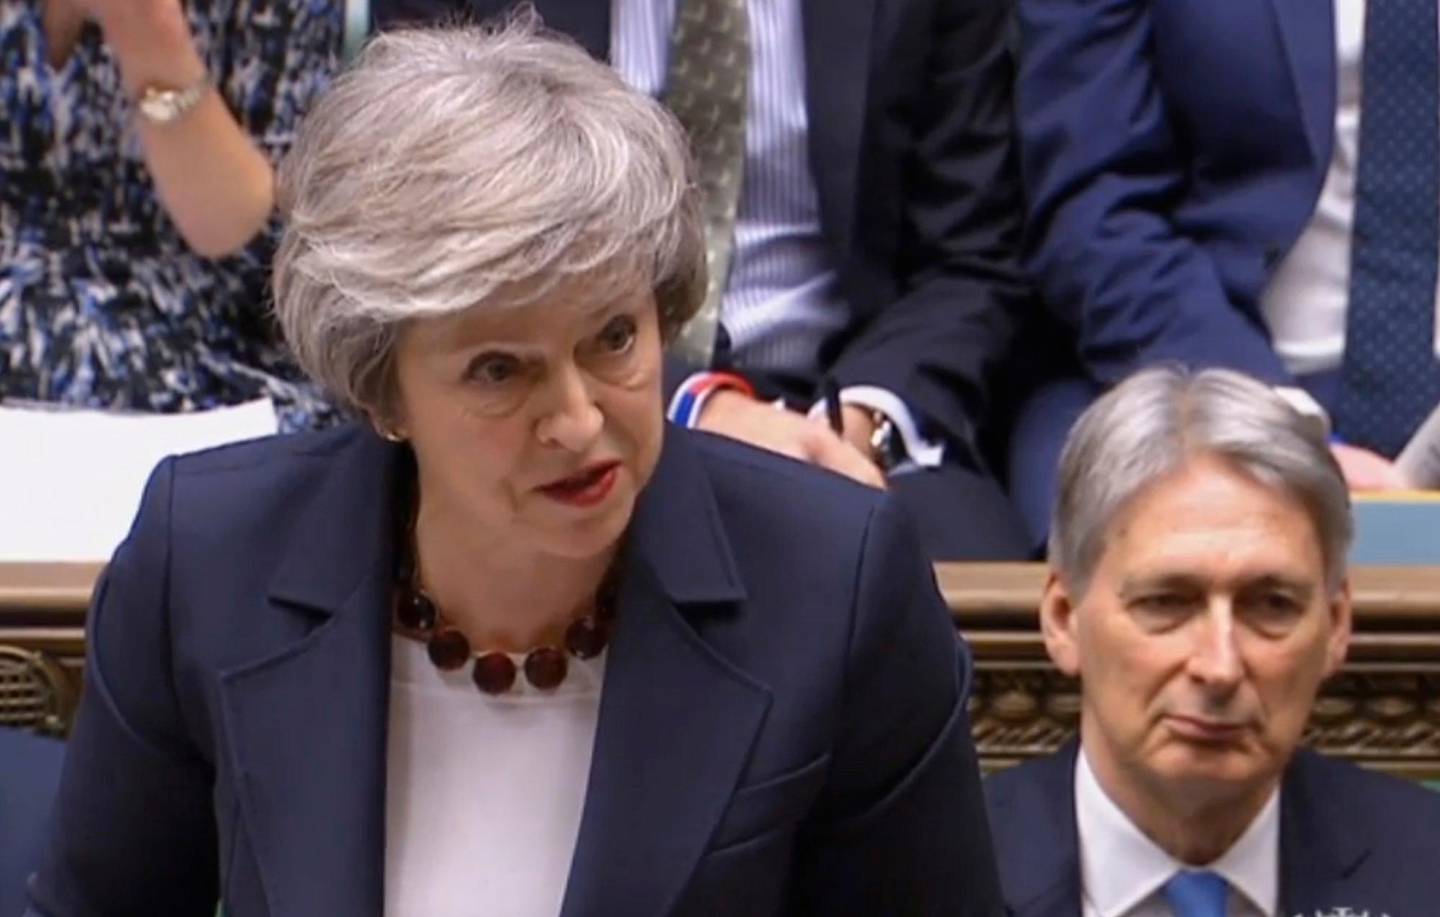 In this grab taken from video, Britain's Prime Minister Theresa May speaks during Prime Minister's Questions in the House of Commons, London, Wednesday, Jan. 9, 2019.  The British government brought its little-loved Brexit deal back to Parliament on Wednesday, a month after postponing a vote on the agreement to stave off near-certain defeat. (House of Commons/PA via AP)